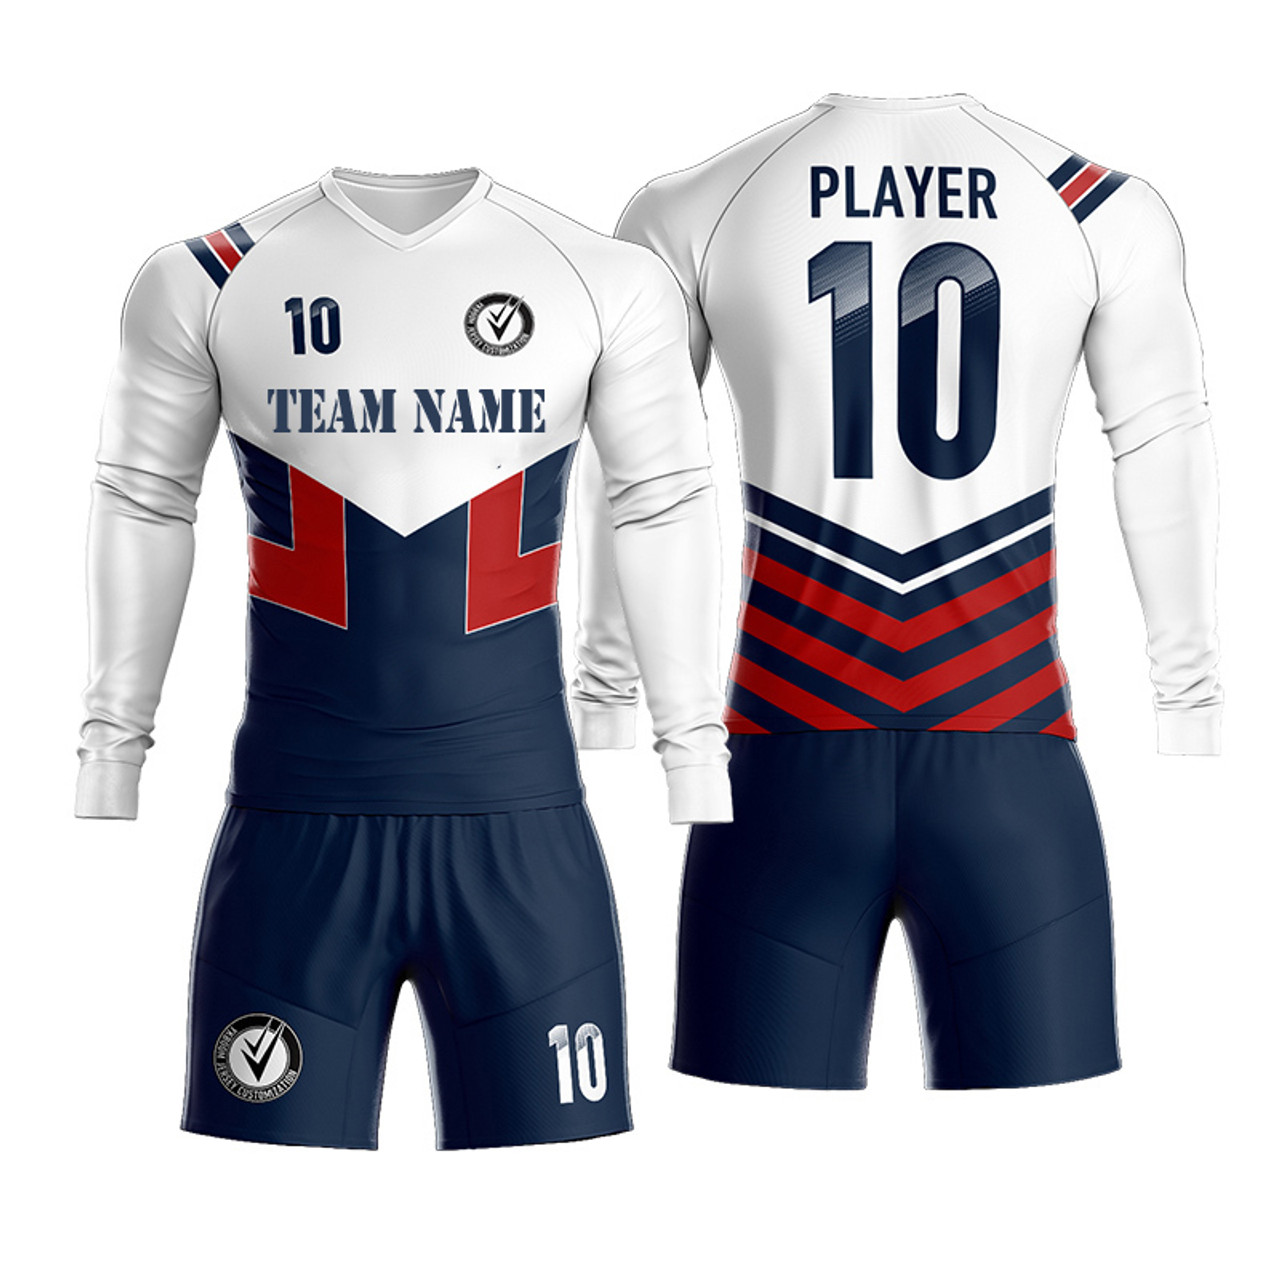 Custom Full Sublimation Soccer Uniform and goalkeeper jerseys online add with your team name ,logo and number.